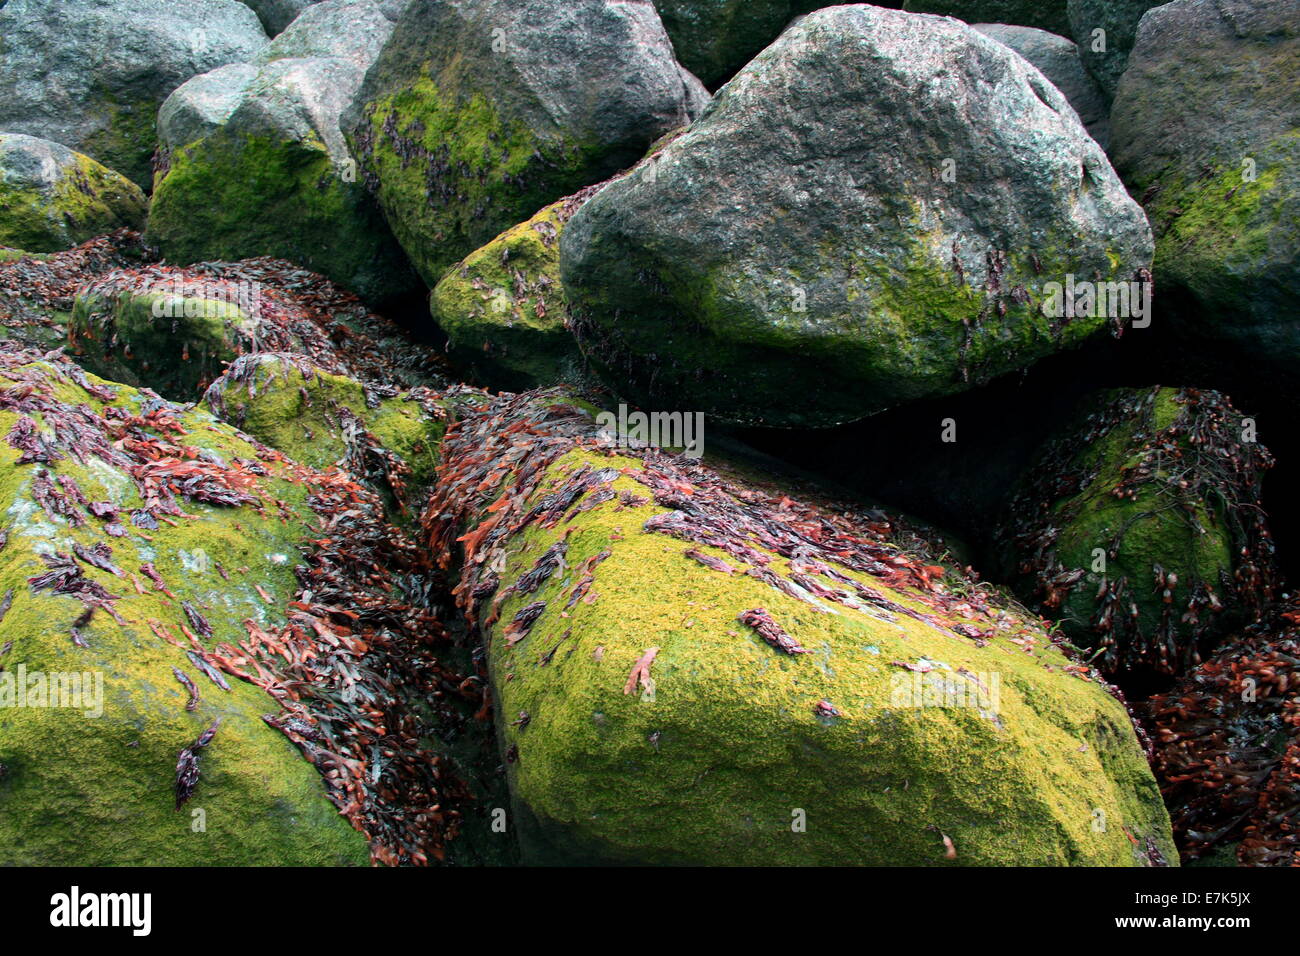 Seaweed covered rocks revealed by the low tide Stock Photo